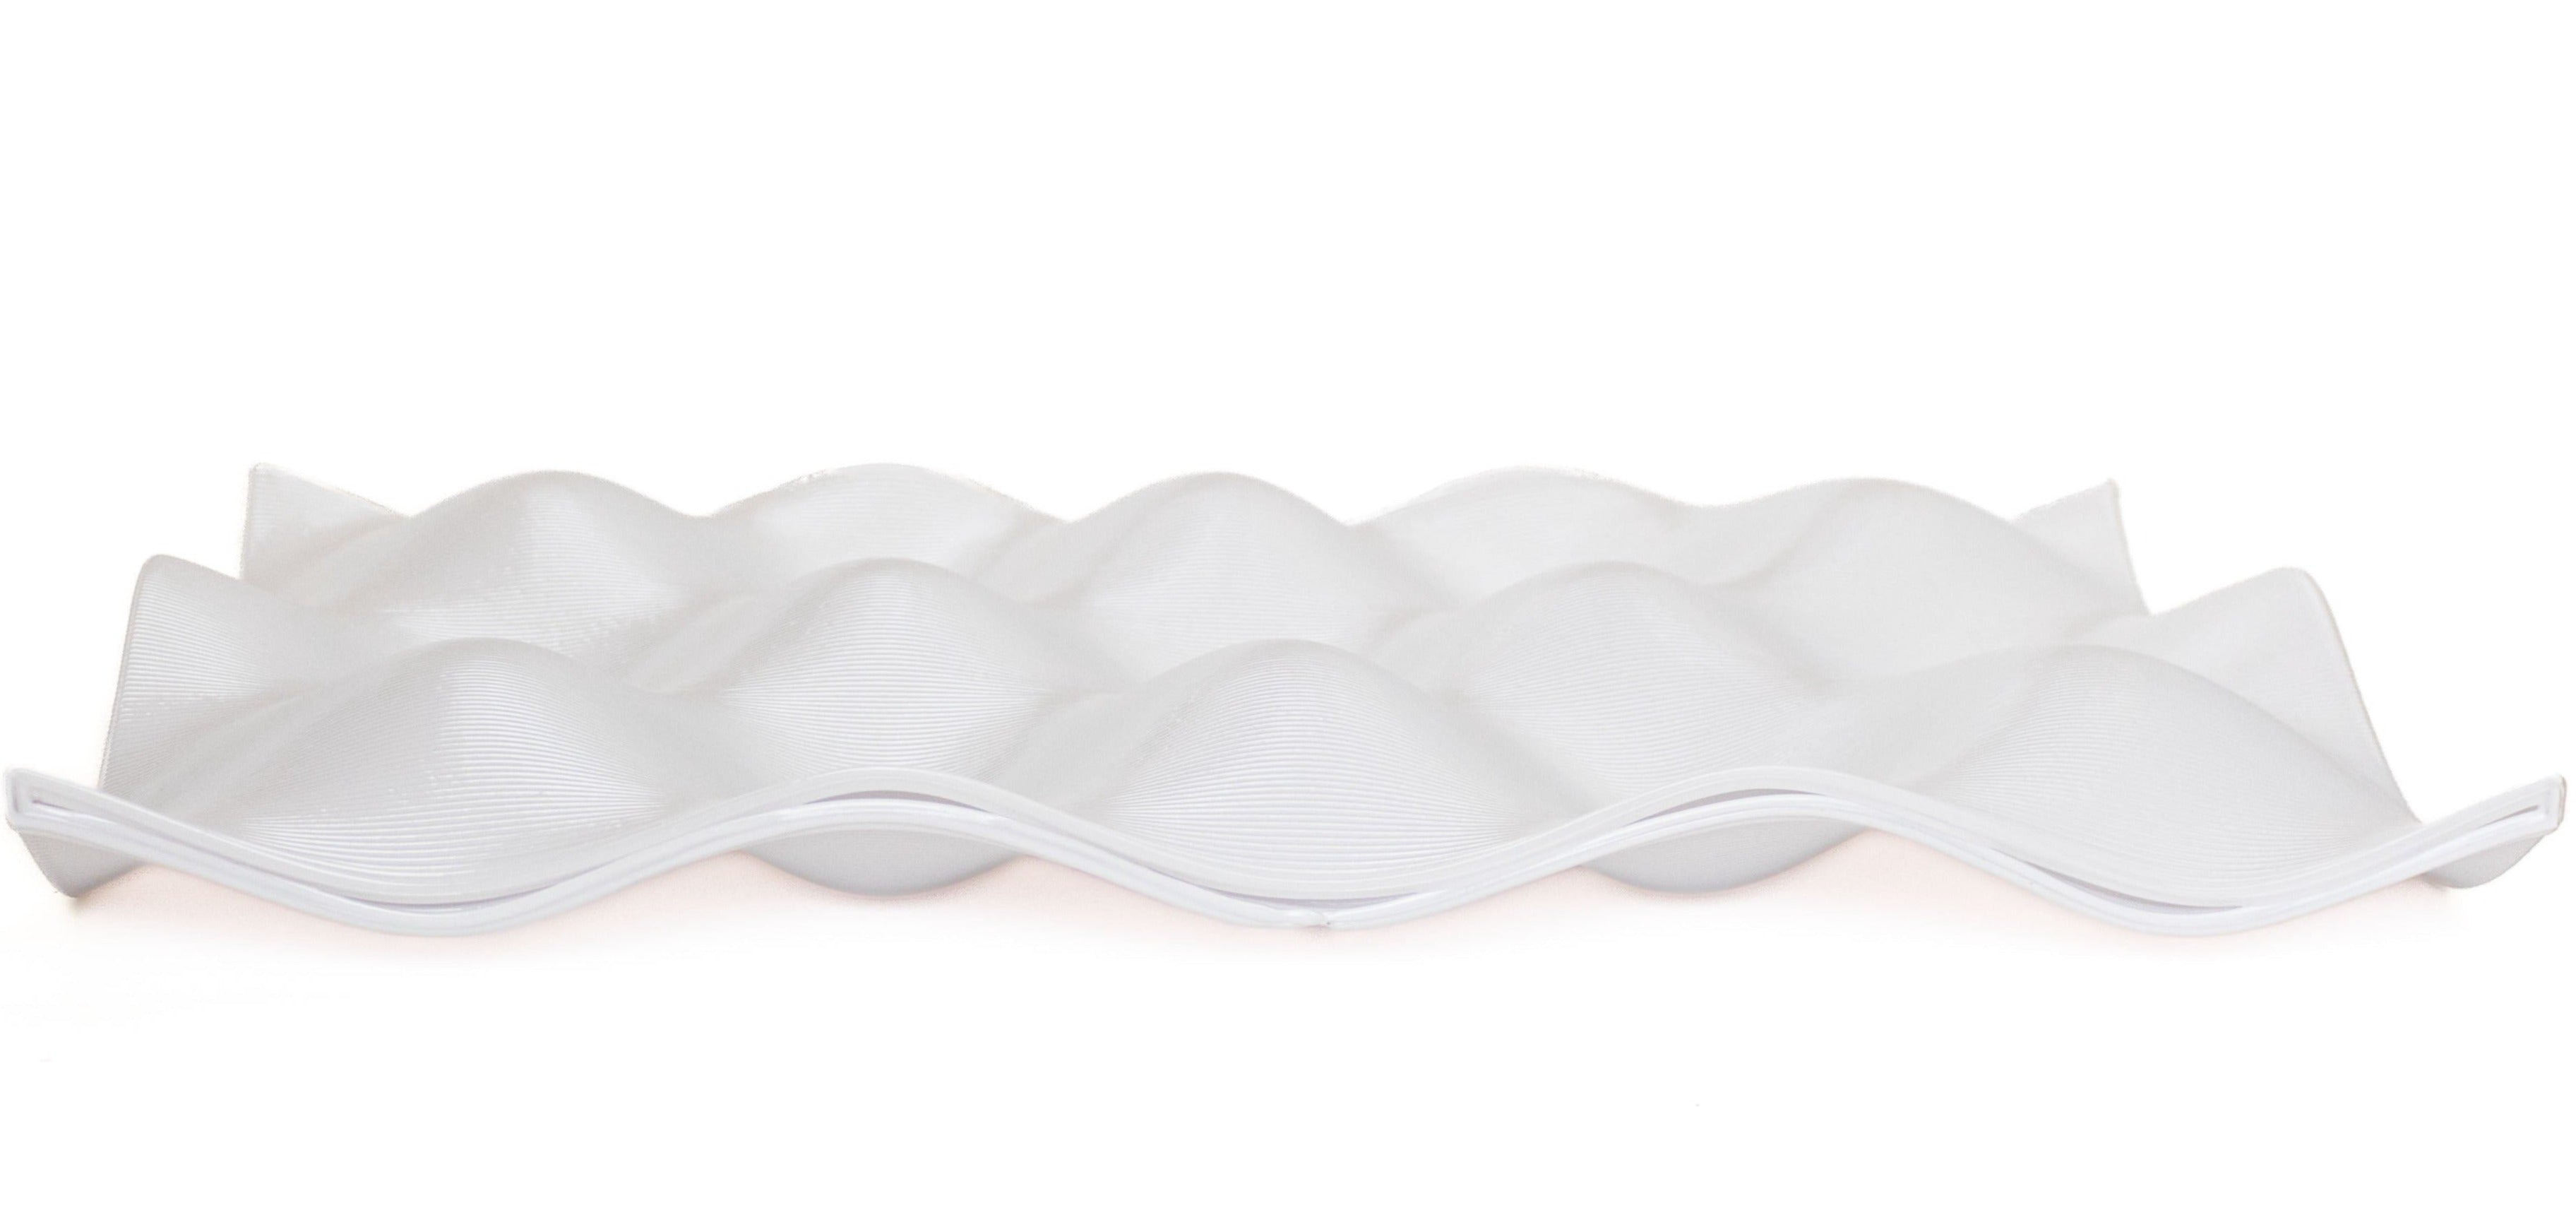 3D Tray Opaque White